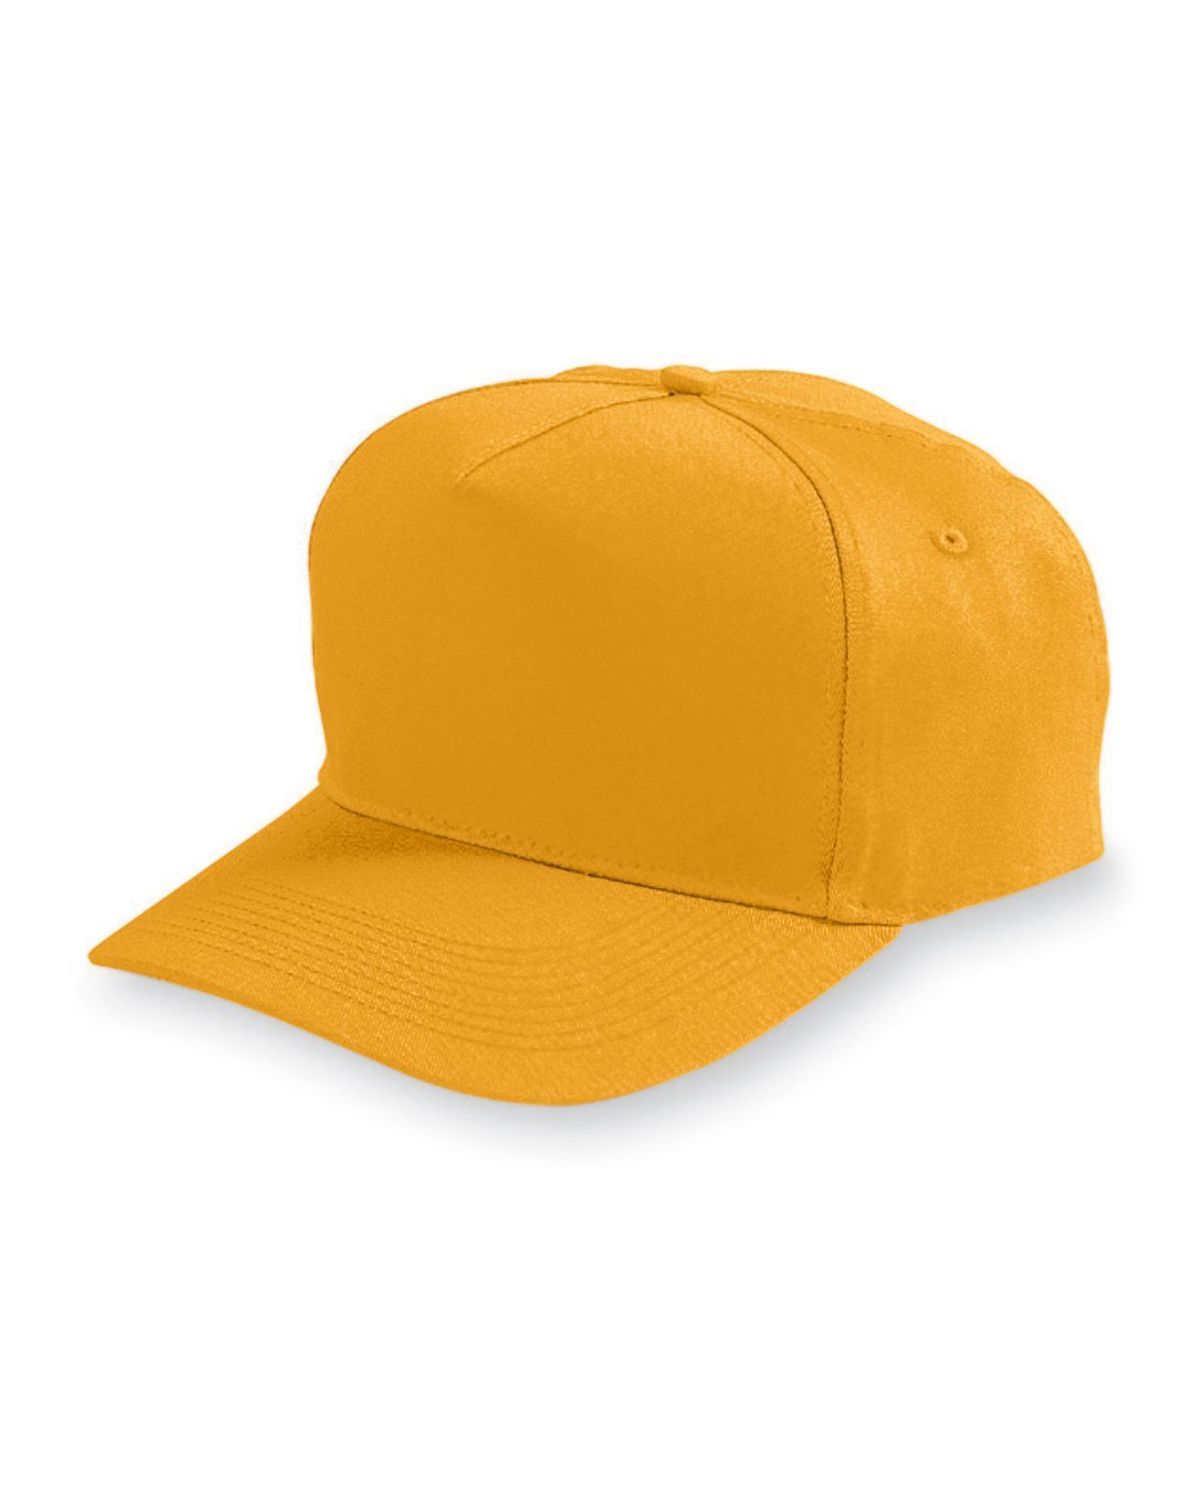 'Augusta 6207 Youth Five-Panel Cotton Twill Cap'